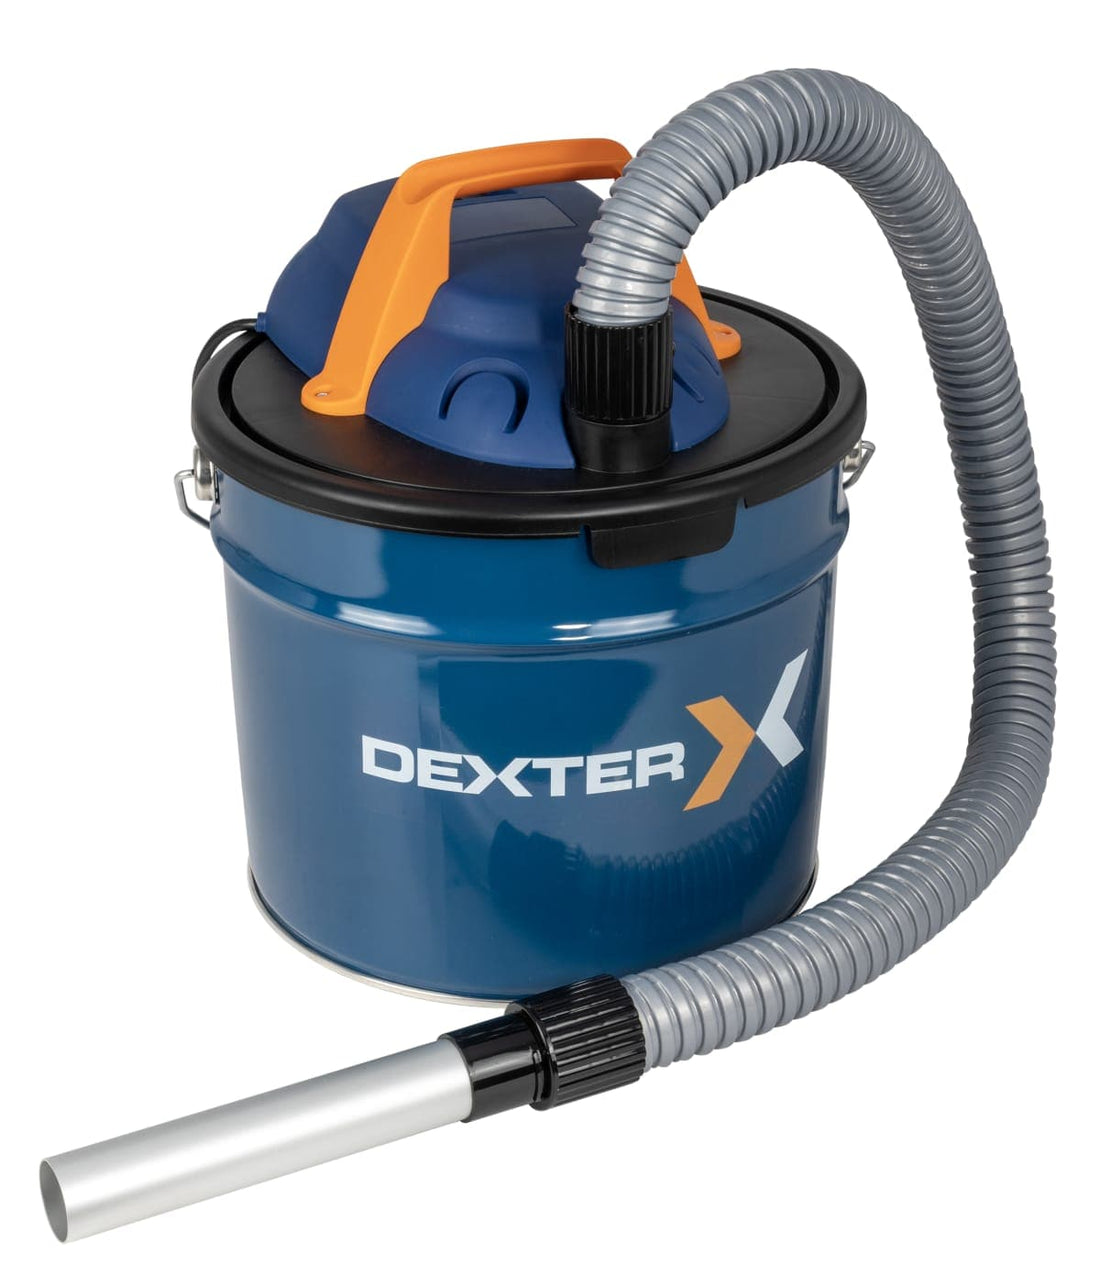 DEXTER BASIC ELECTRIC ASH EXTRACTOR, 1000 W, 17 LITRES, 17 KPA - best price from Maltashopper.com BR400003558